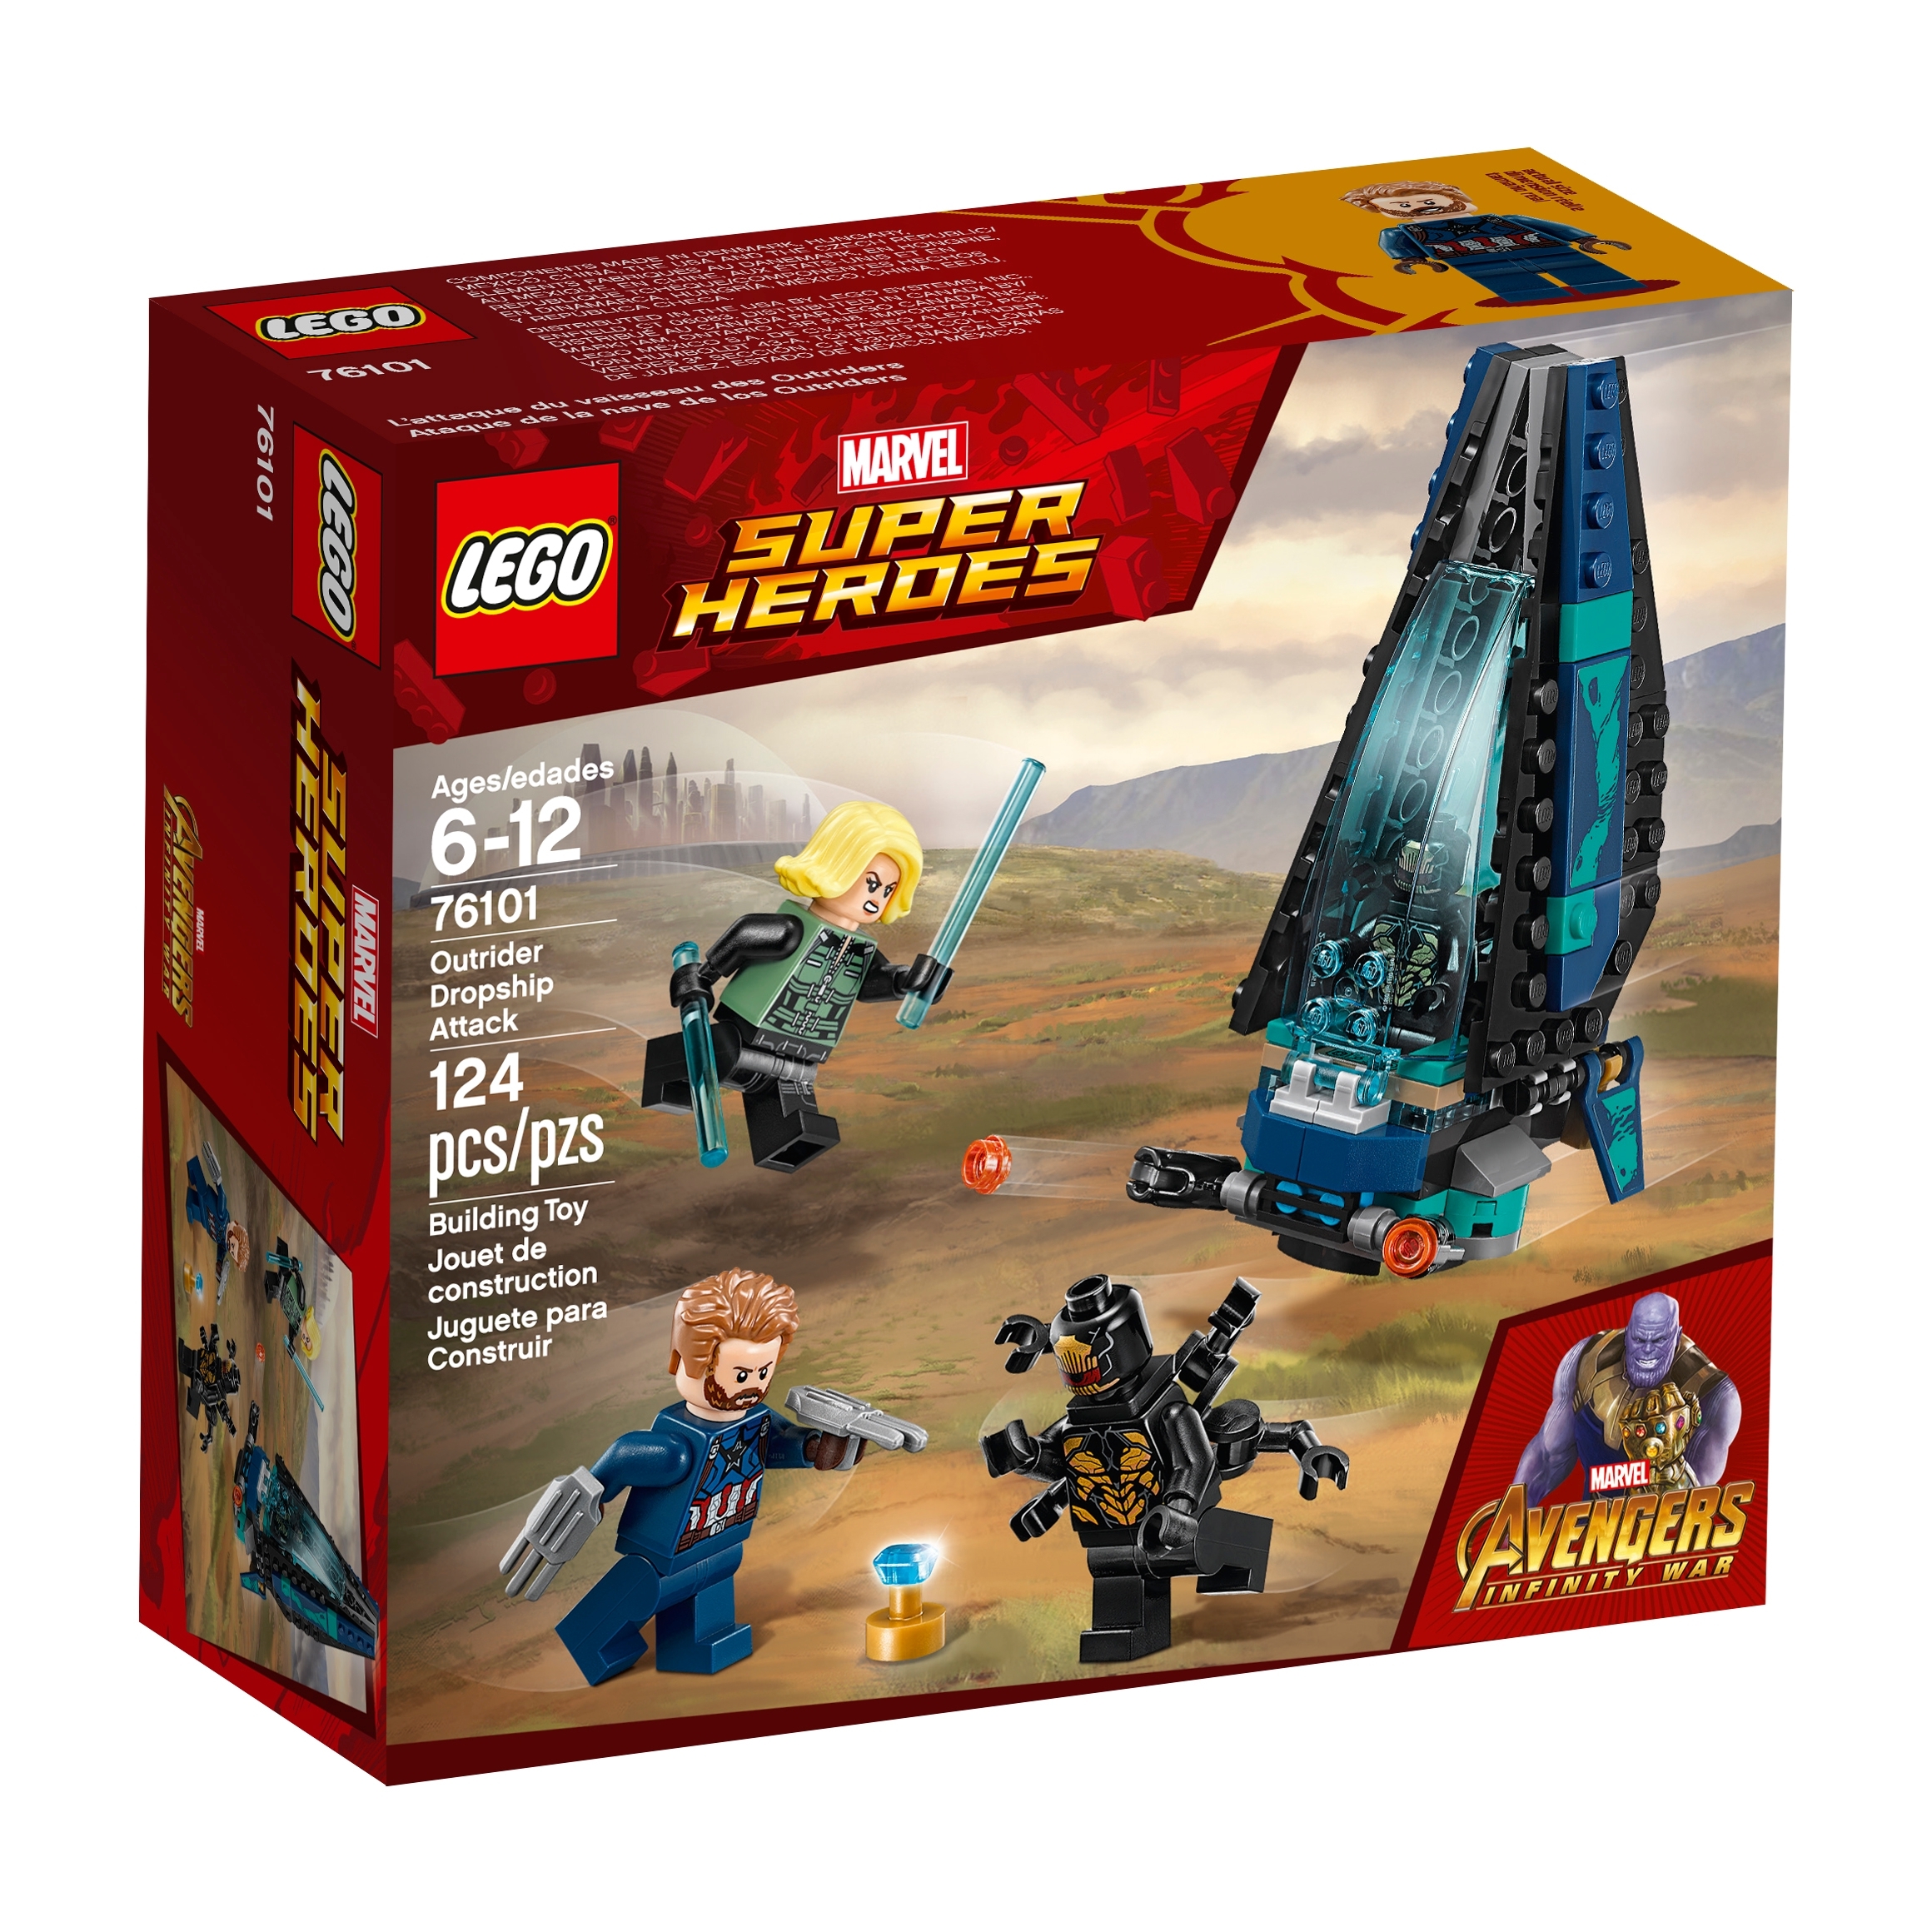 Dropship Attack 76101 Marvel | Buy online the Official LEGO® Shop US